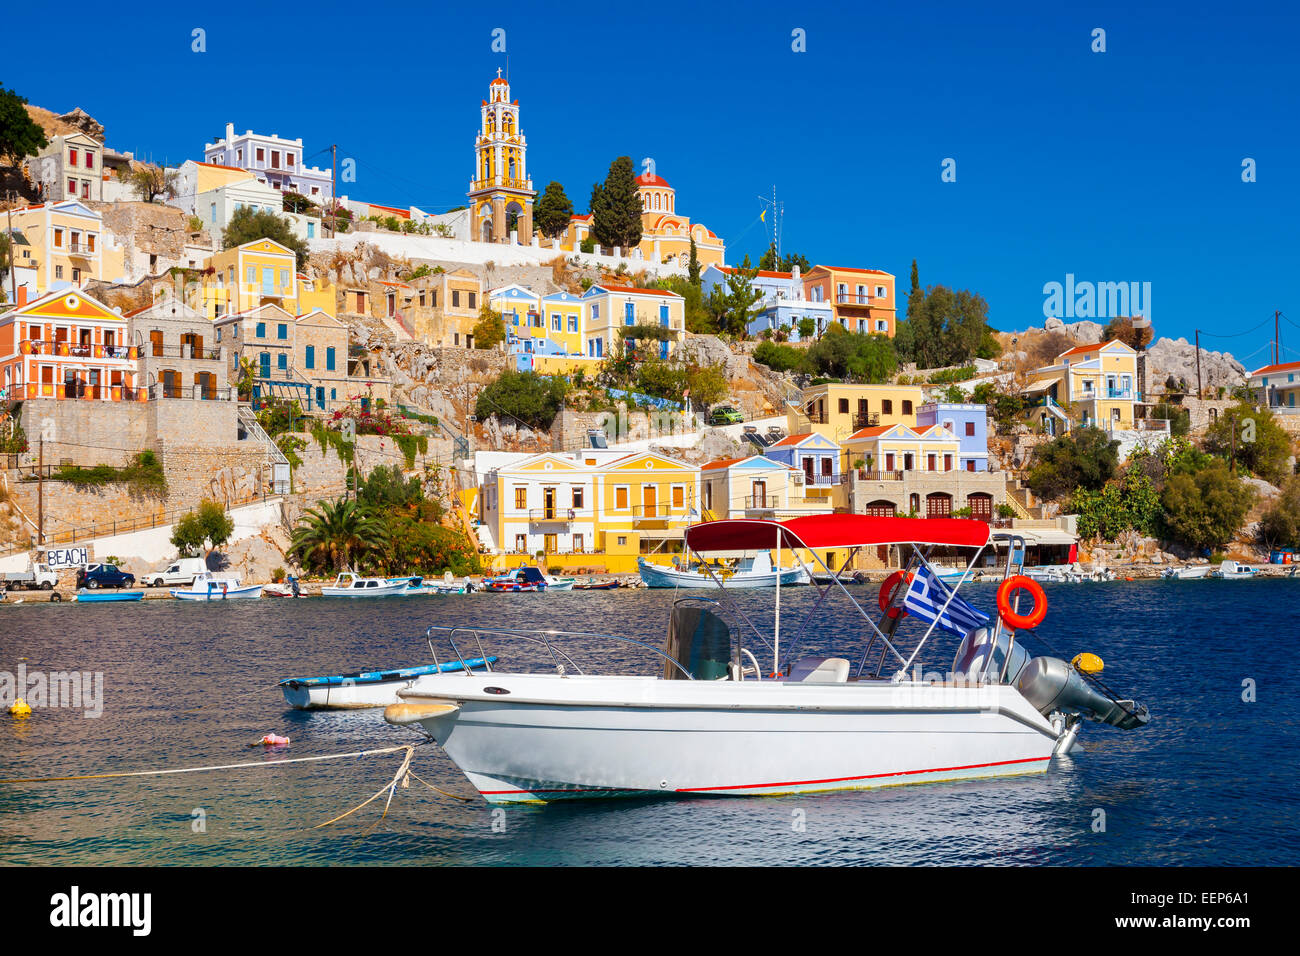 Beautiful summers day at Symi on the Greek island of Symi in the Dodecanese Greece Europe Stock Photo